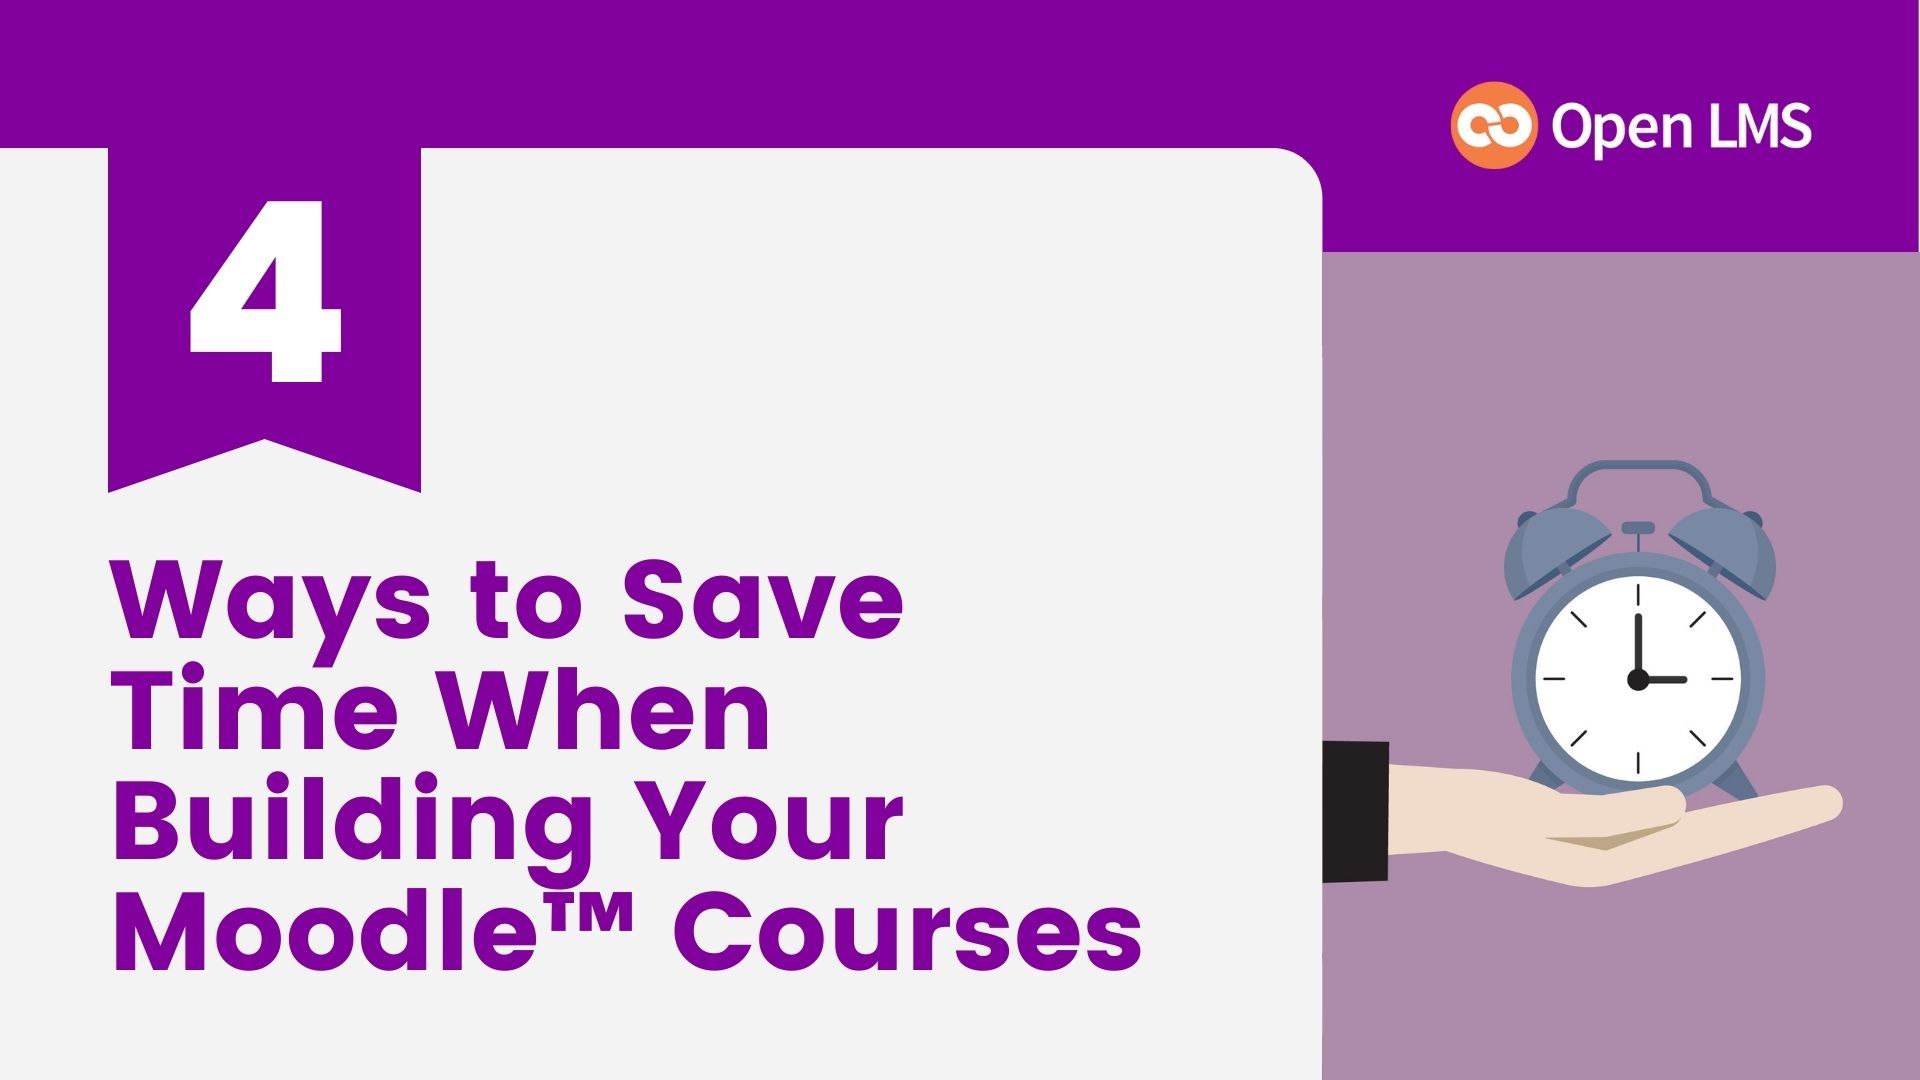 Save time when building your Moodle™ courses